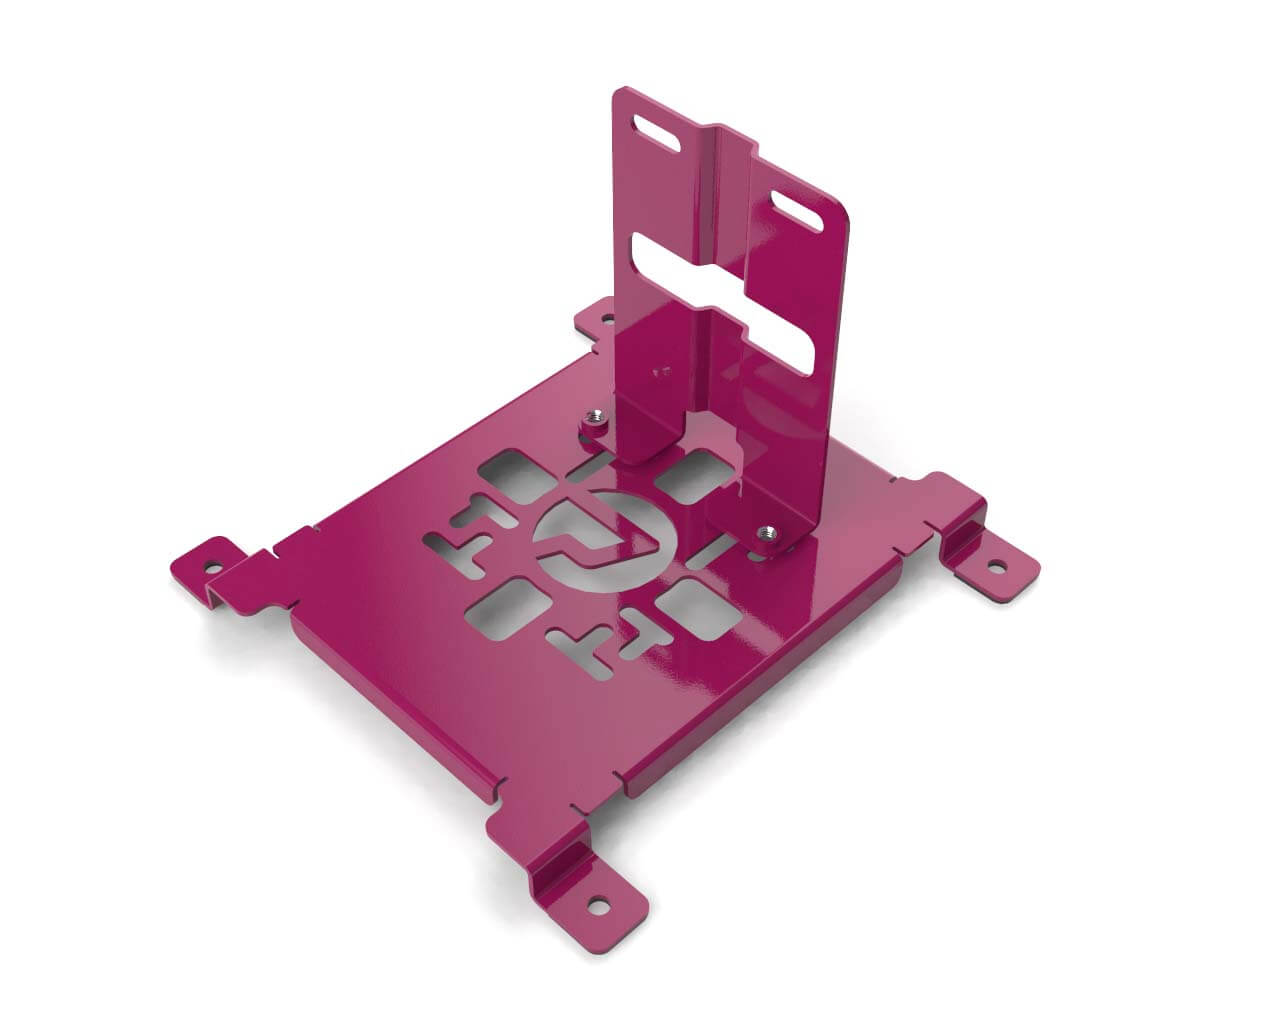 PrimoChill SX CTR2 Spider Mount Bracket Kit - 140mm Series - PrimoChill - KEEPING IT COOL Magenta